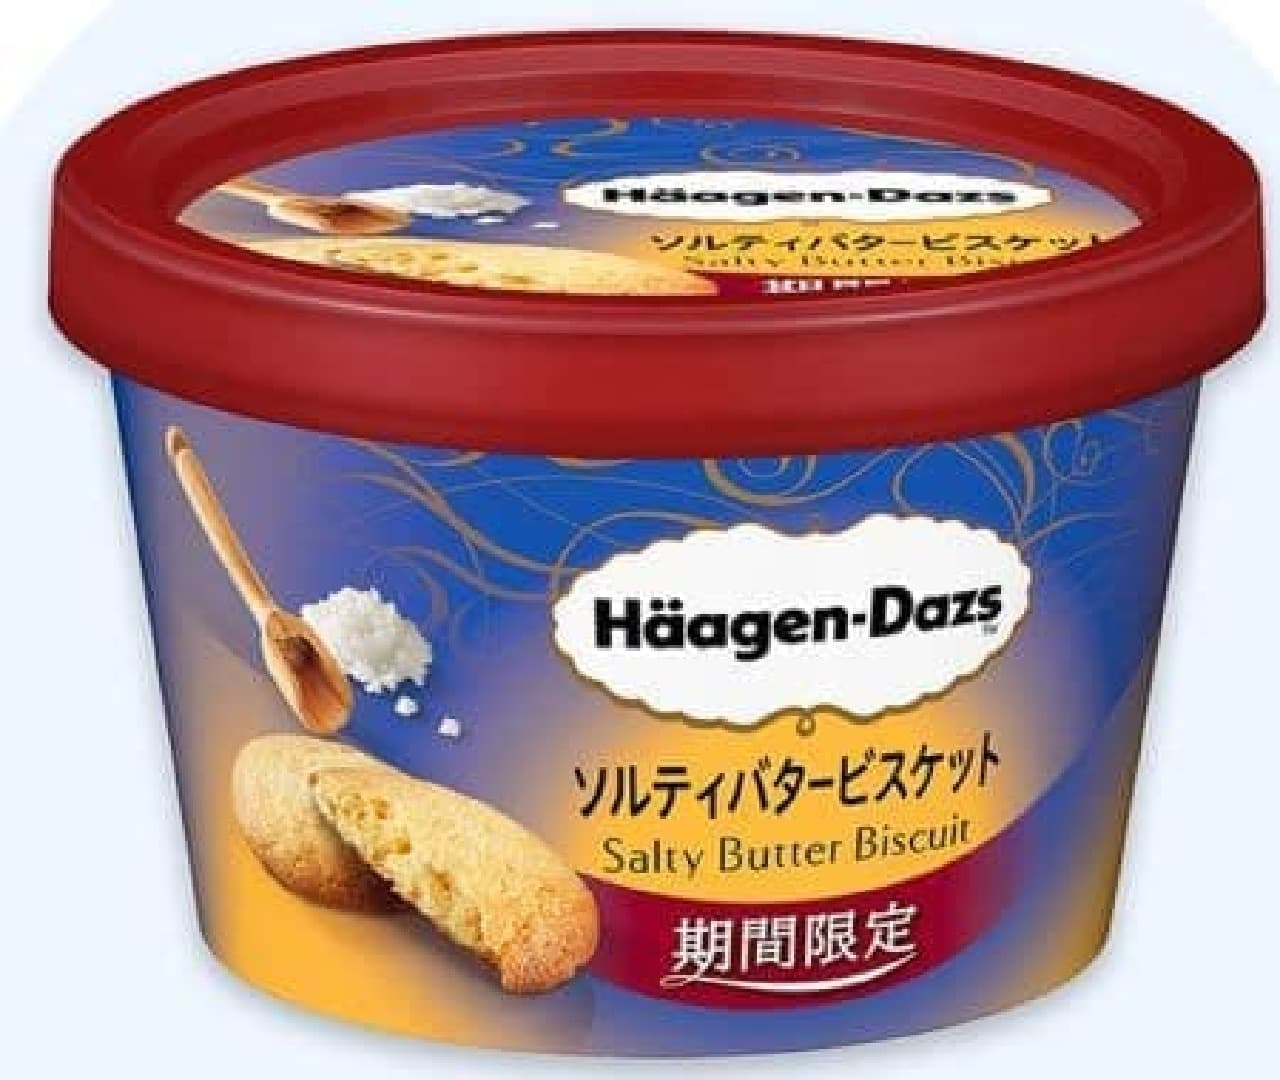 "Salty butter biscuits" is a mixture of rich butterscotch ice cream and fragrantly baked salt butter biscuits.